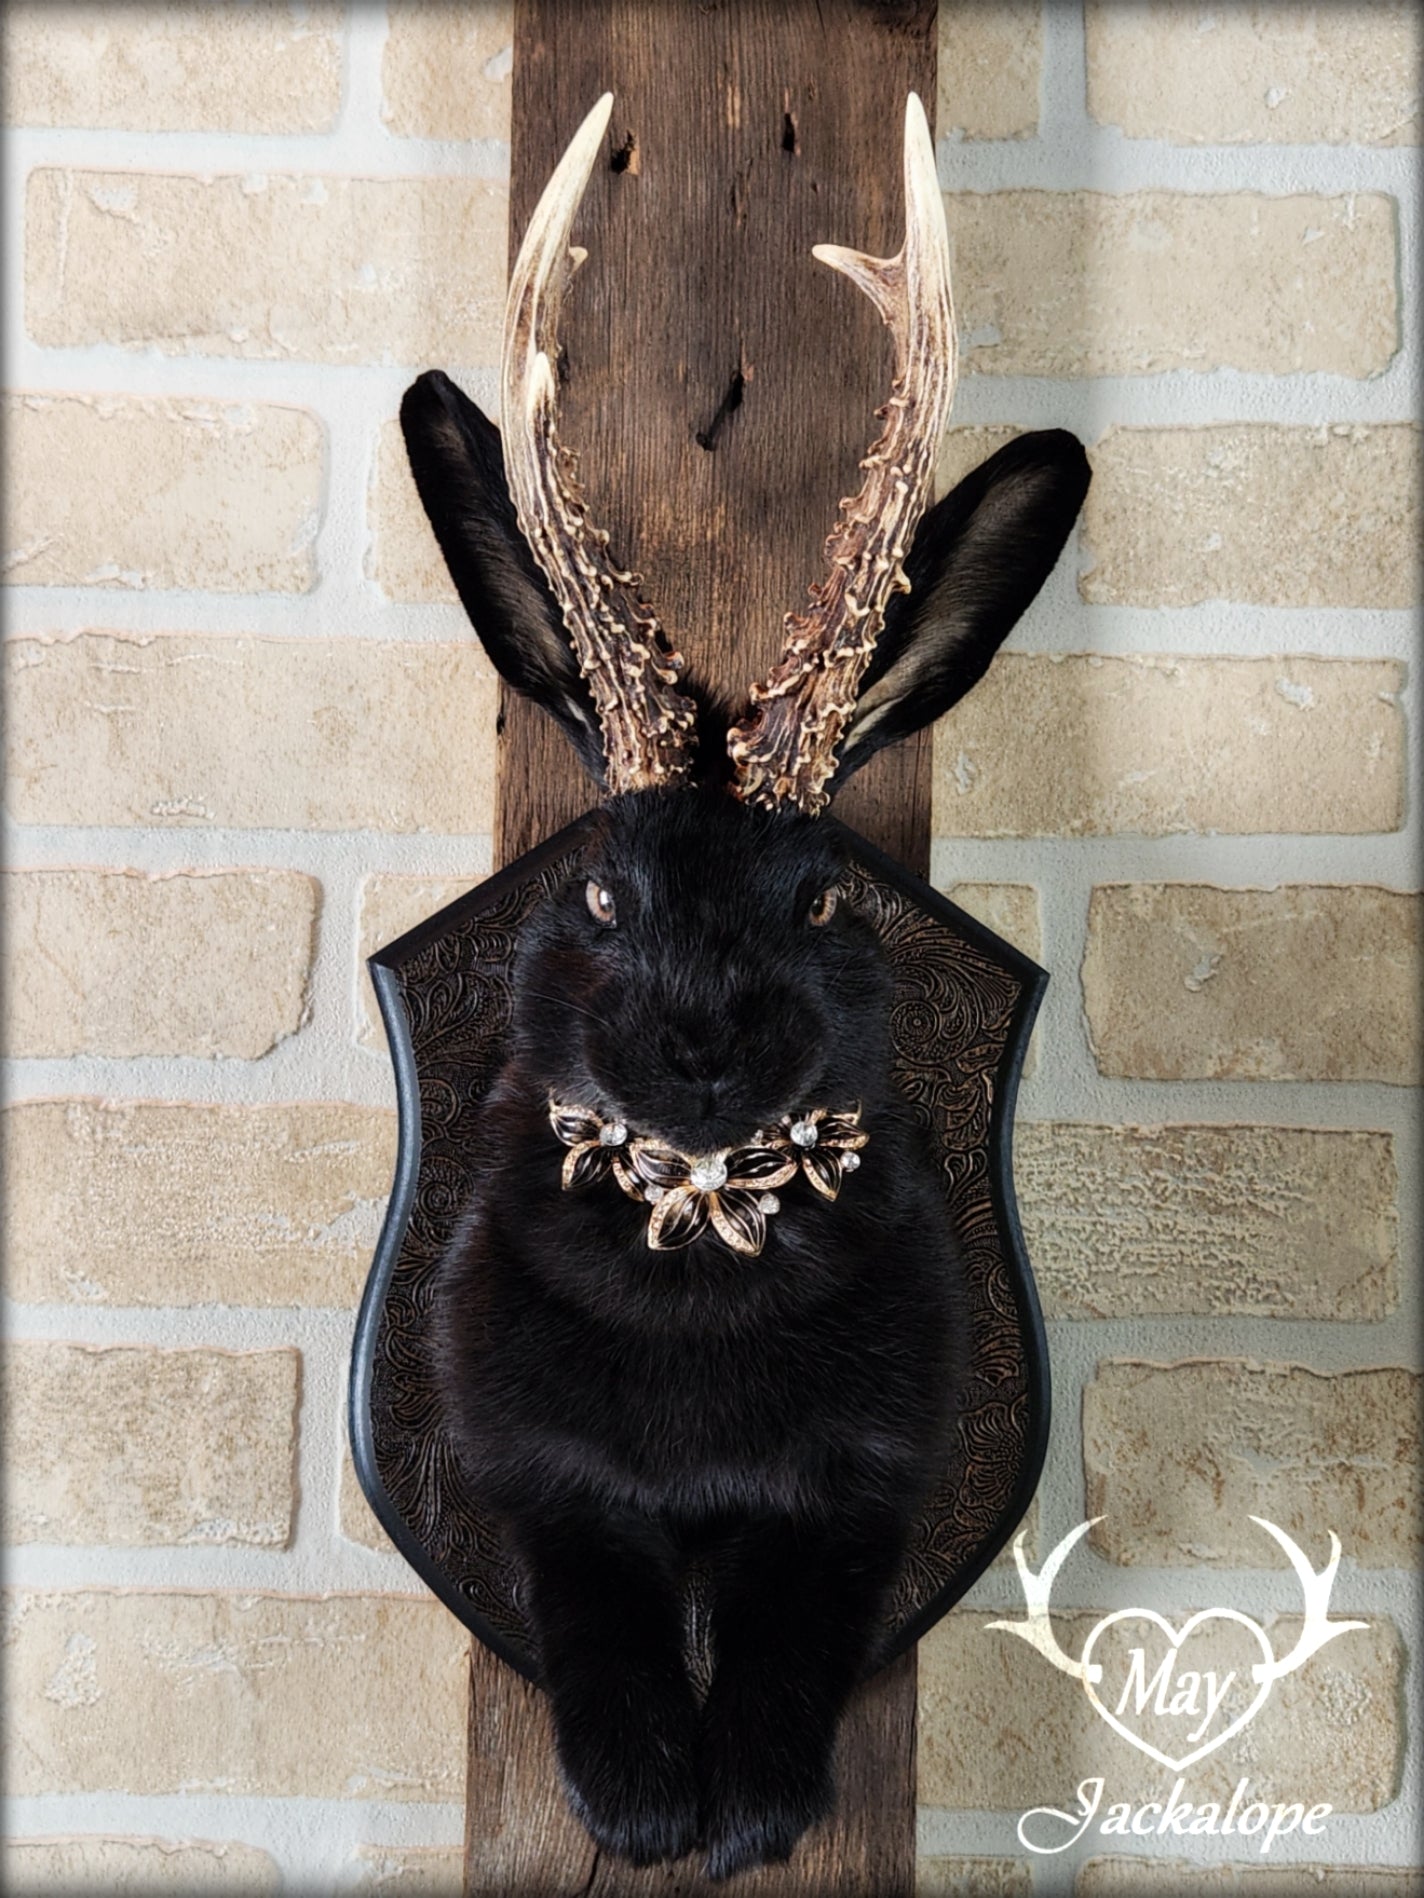 Black Jackalope taxidermy with hazel eyes, real antlers, necklace & on a decorated plaque